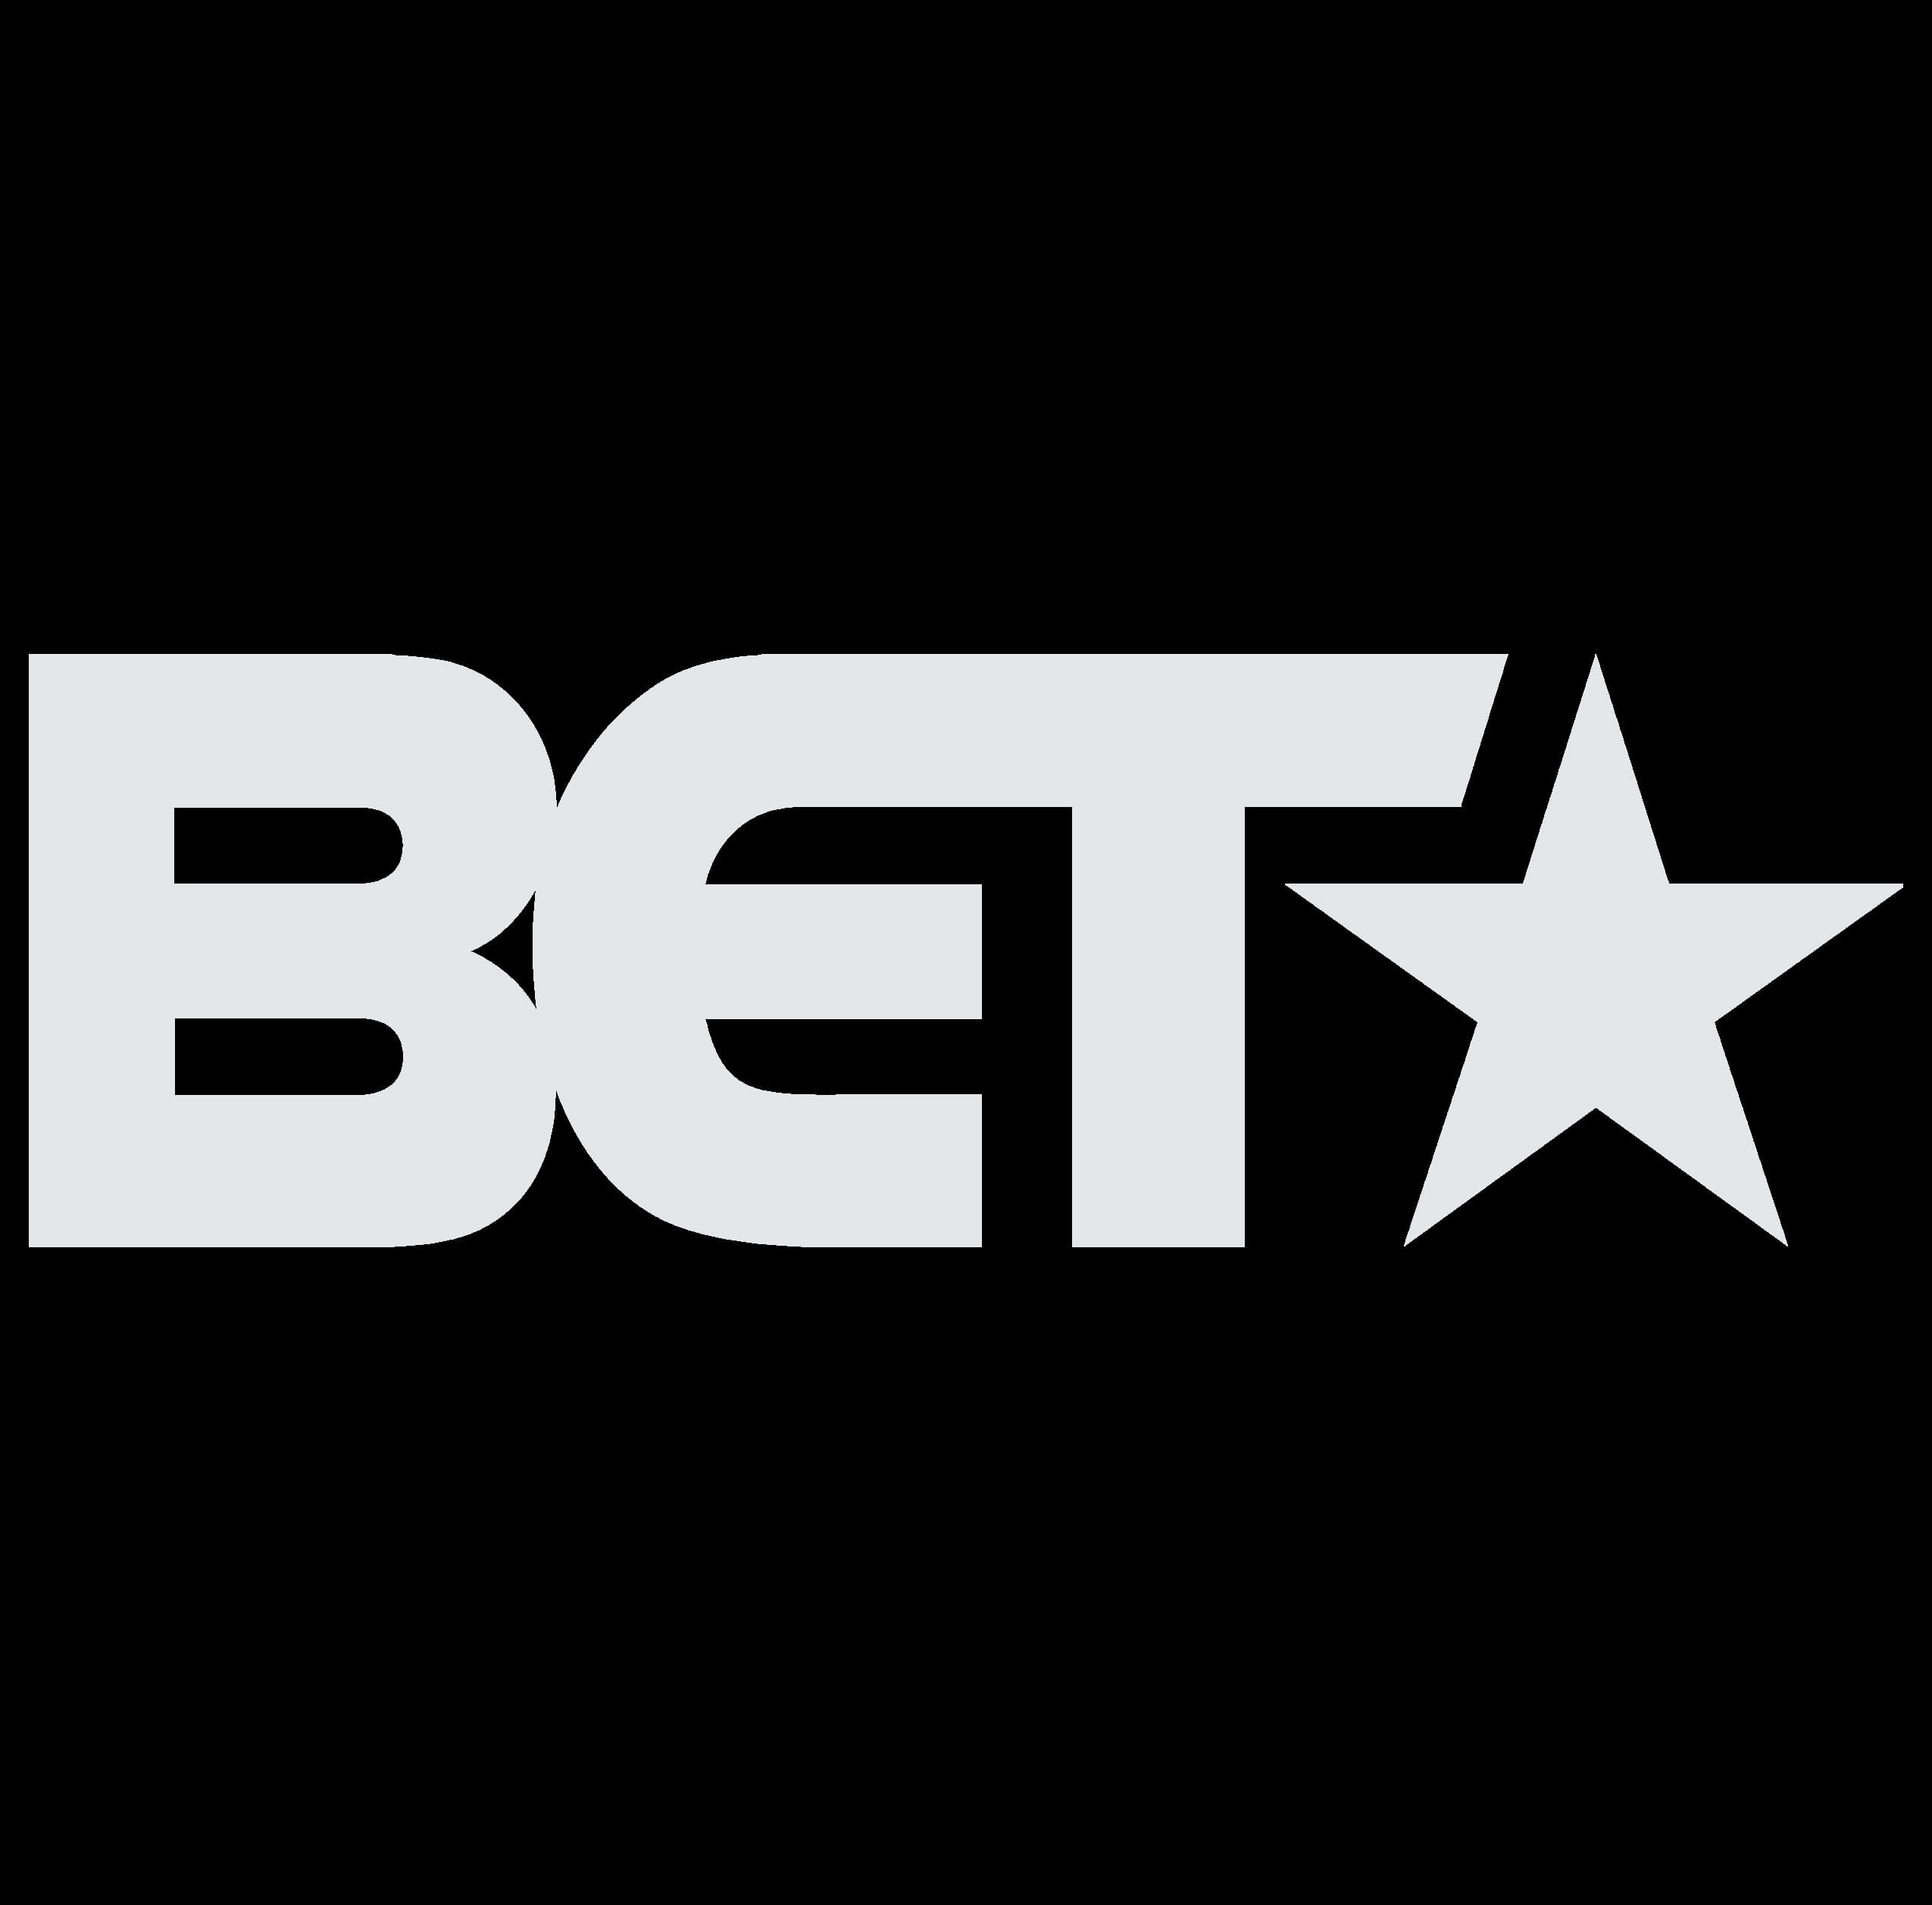 bet awards live streaming online free